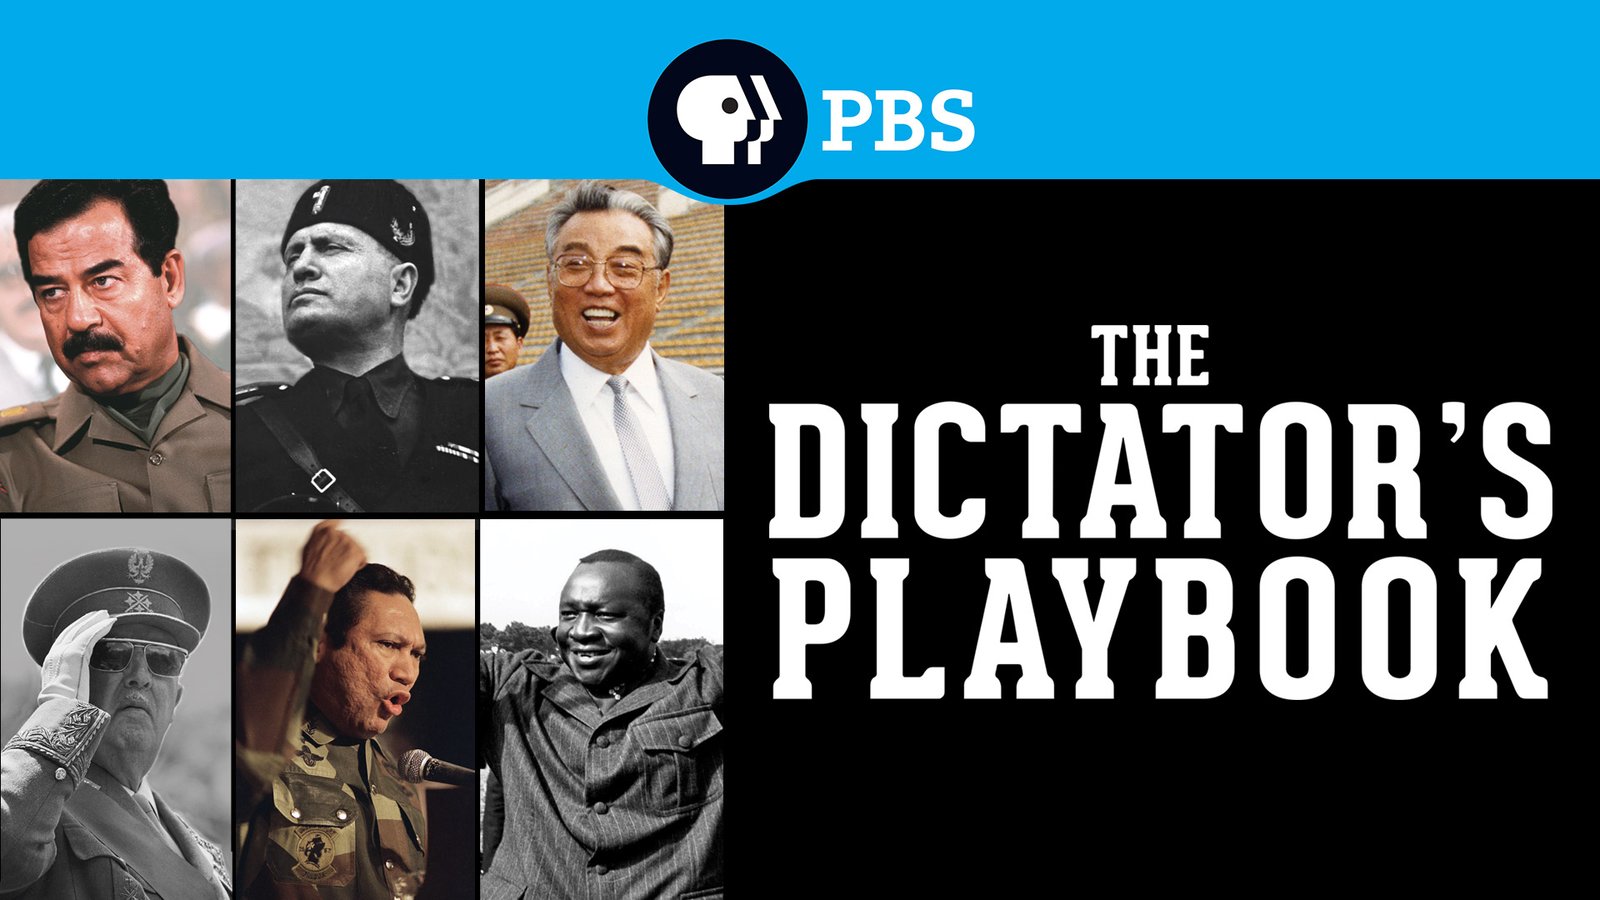 The Dictator's Playbook - Profiles in Tyranny